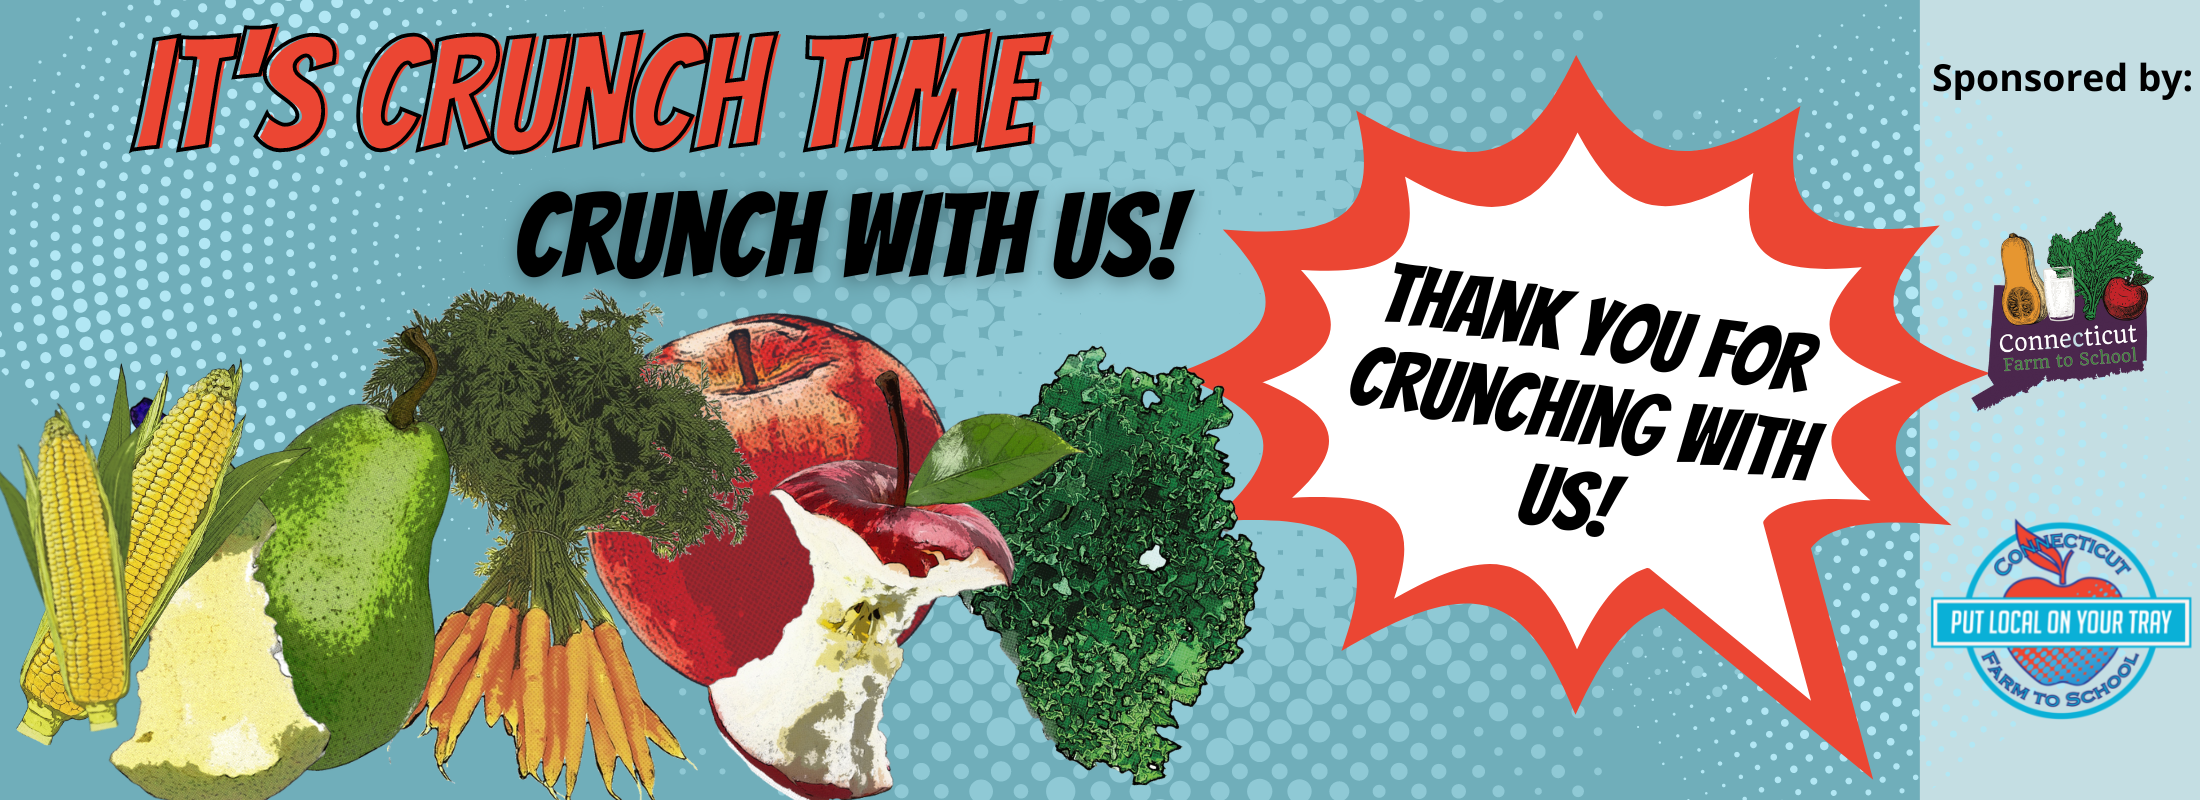 Thank you for crunching with us banner